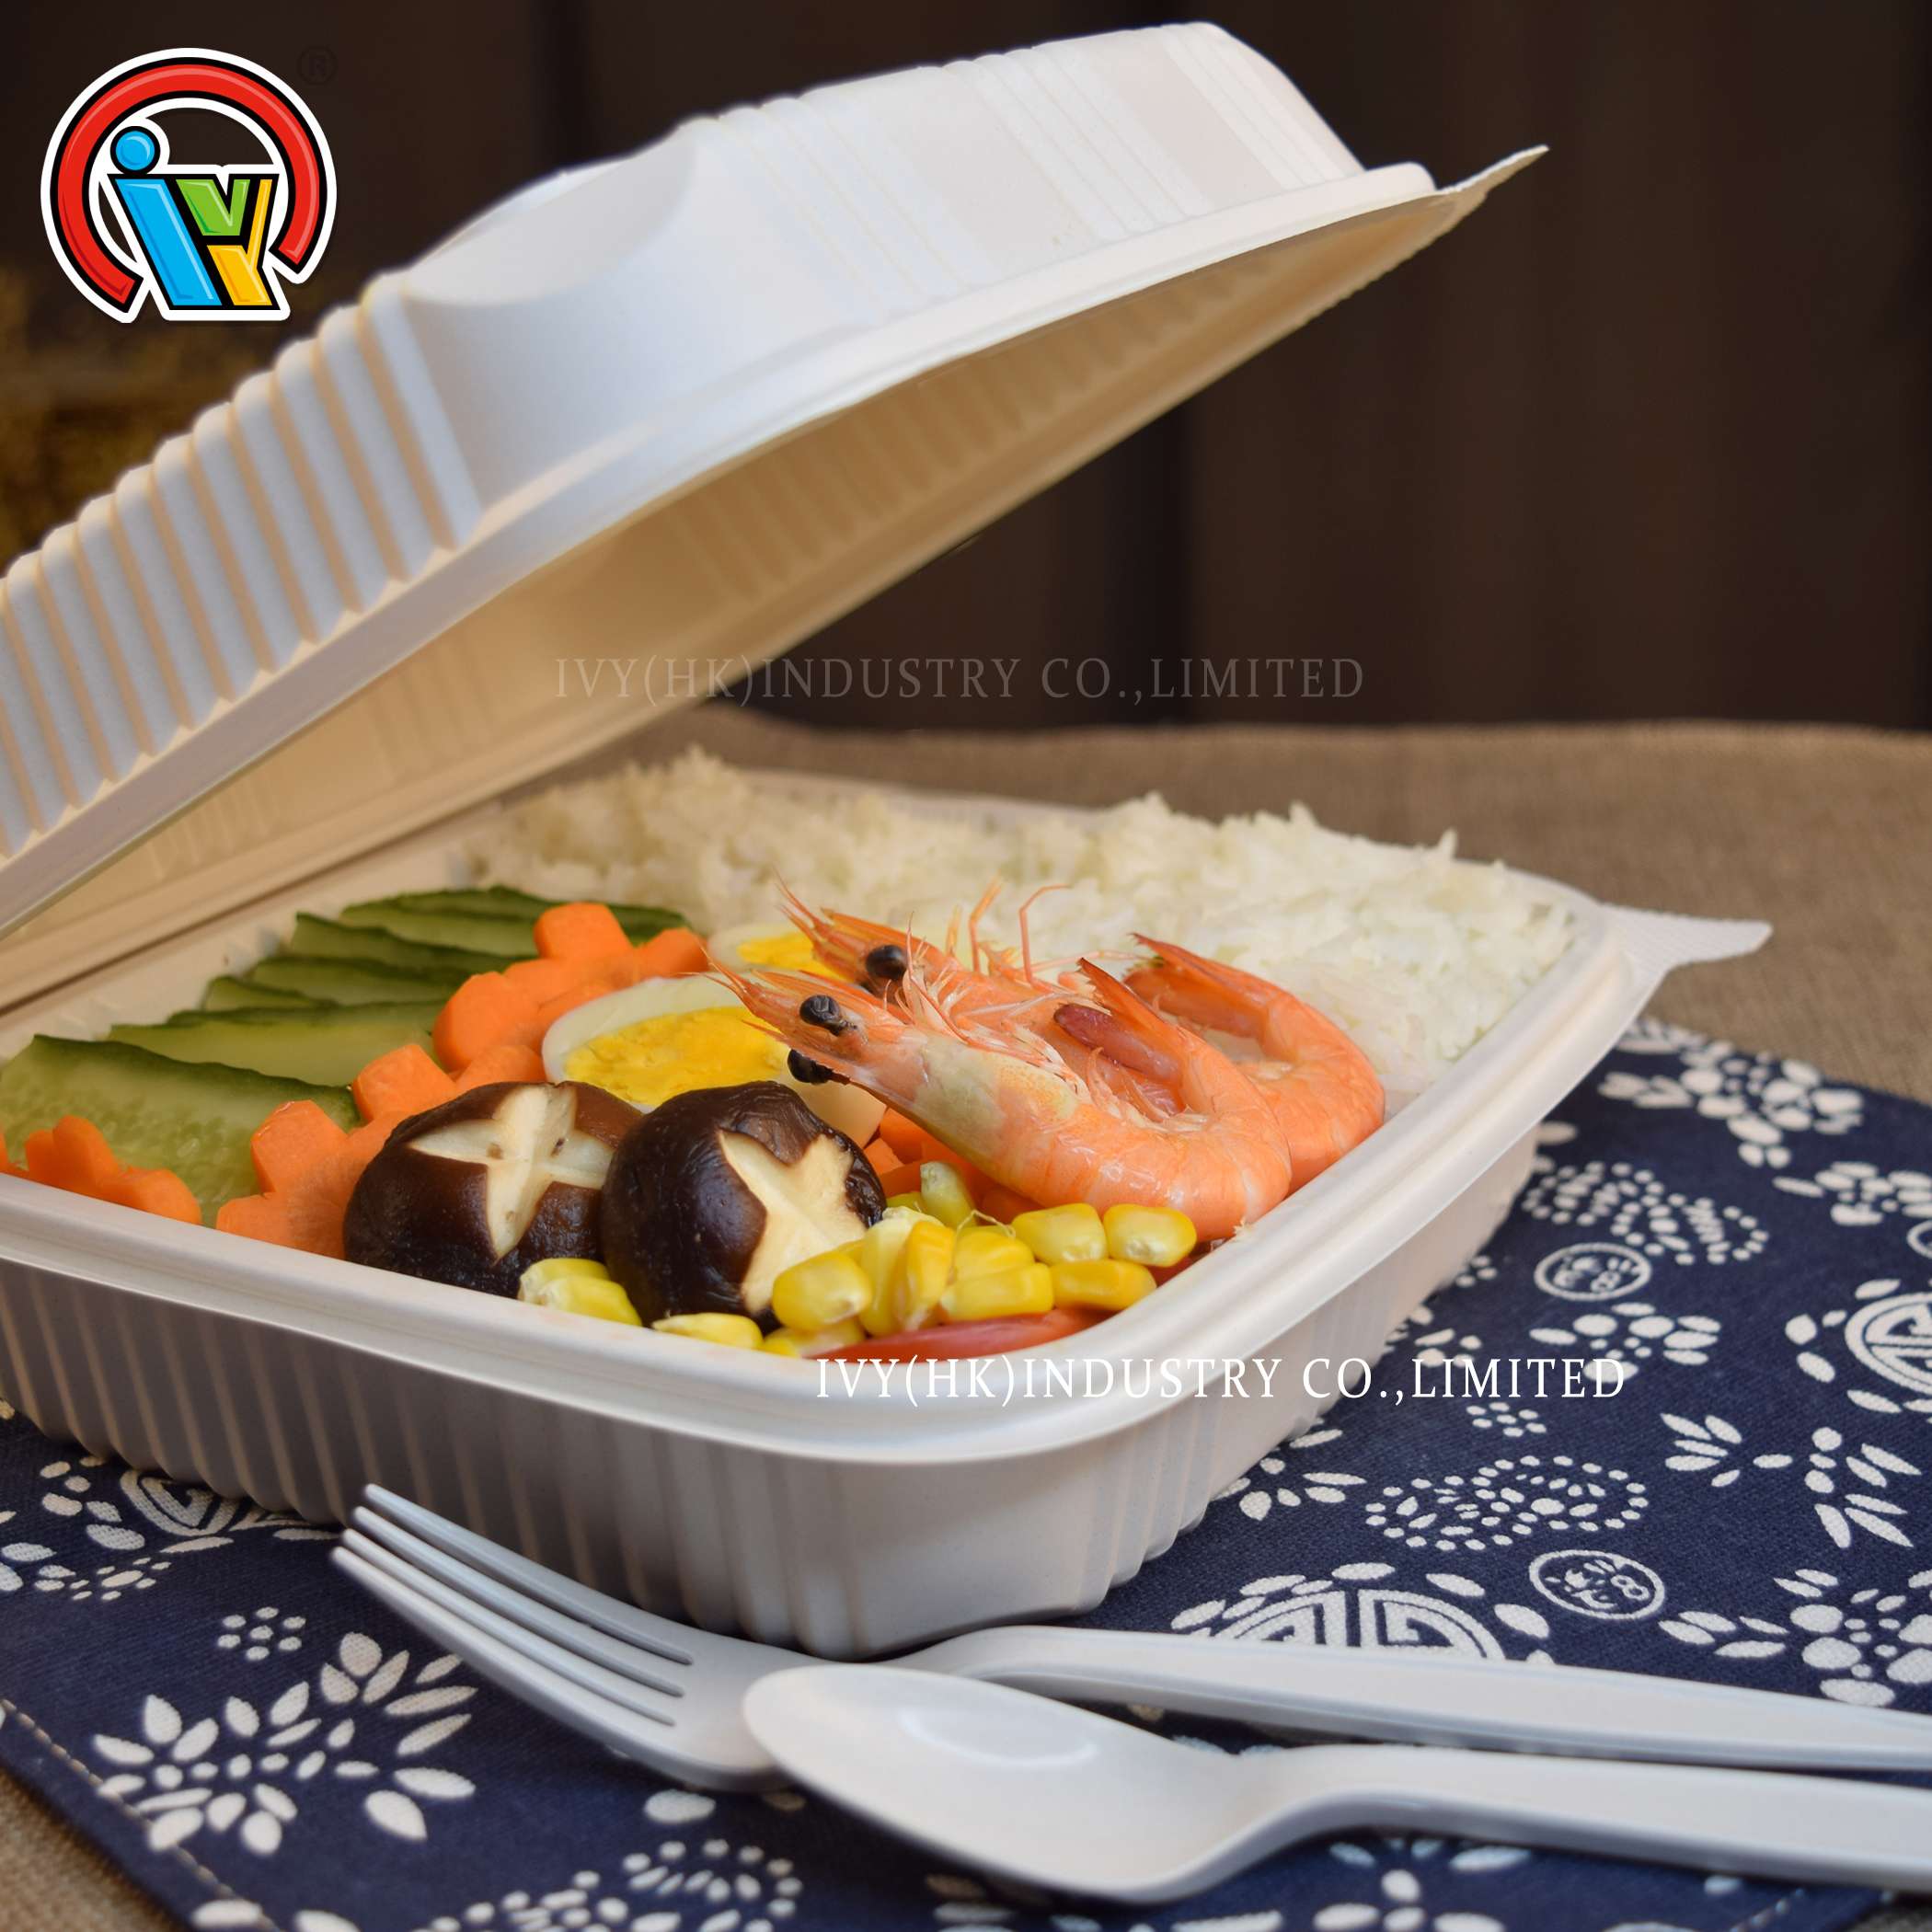 Wholesale Biodegradable Disposable Lunch Box,suppliers,manufacturers,factories  - IVY Food